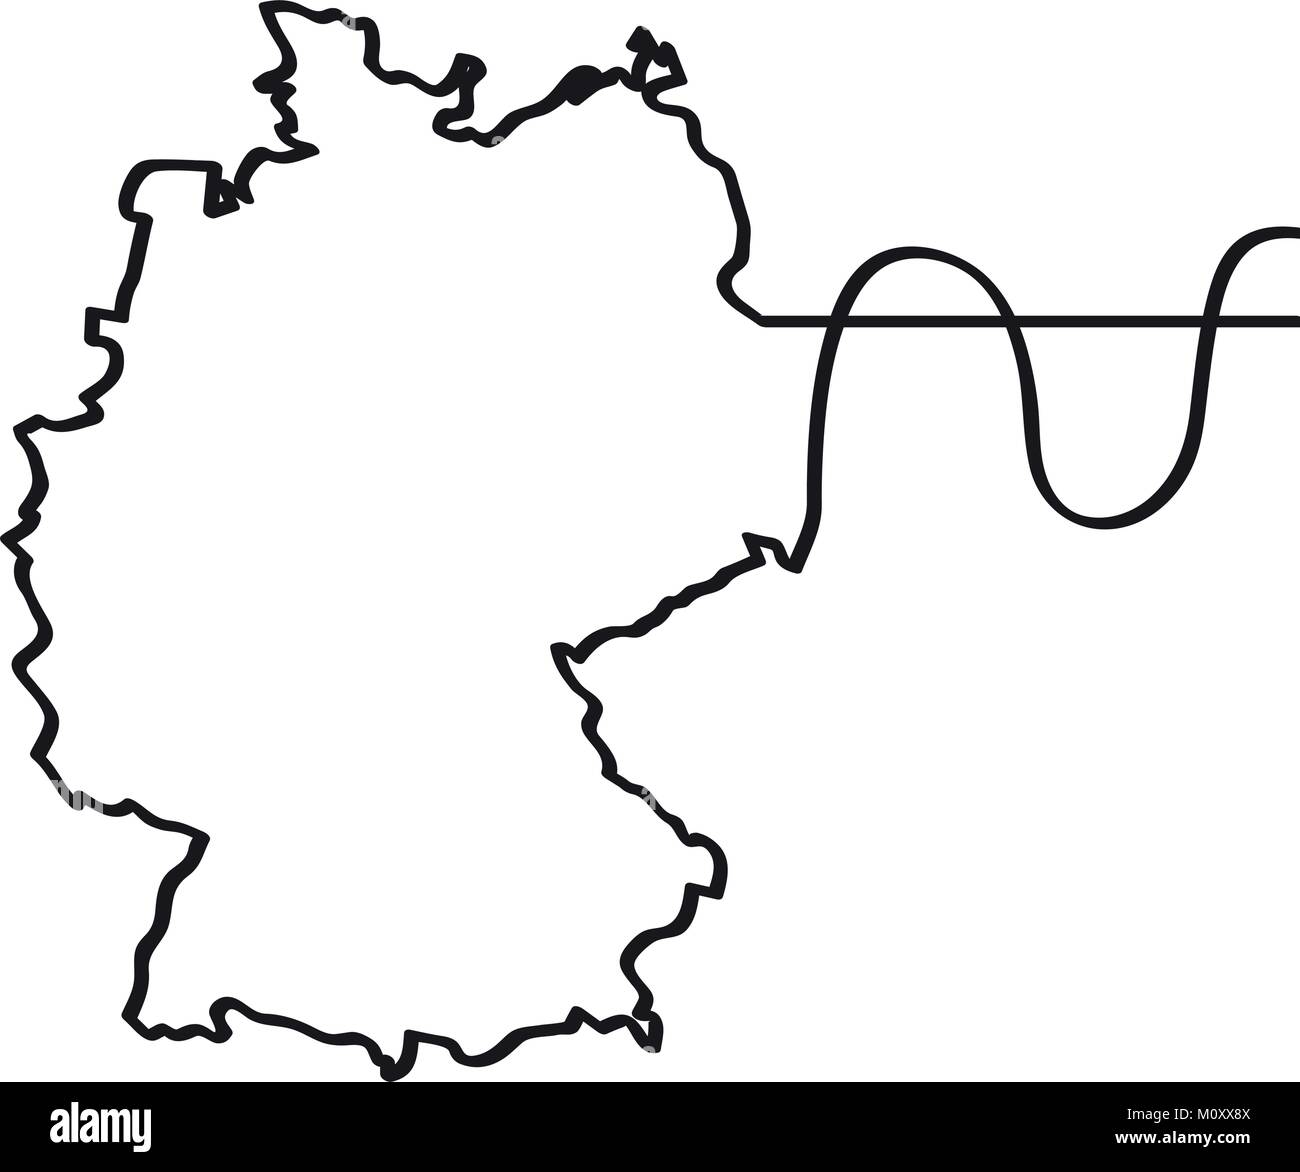 Map of Germany. Continous line Stock Vector